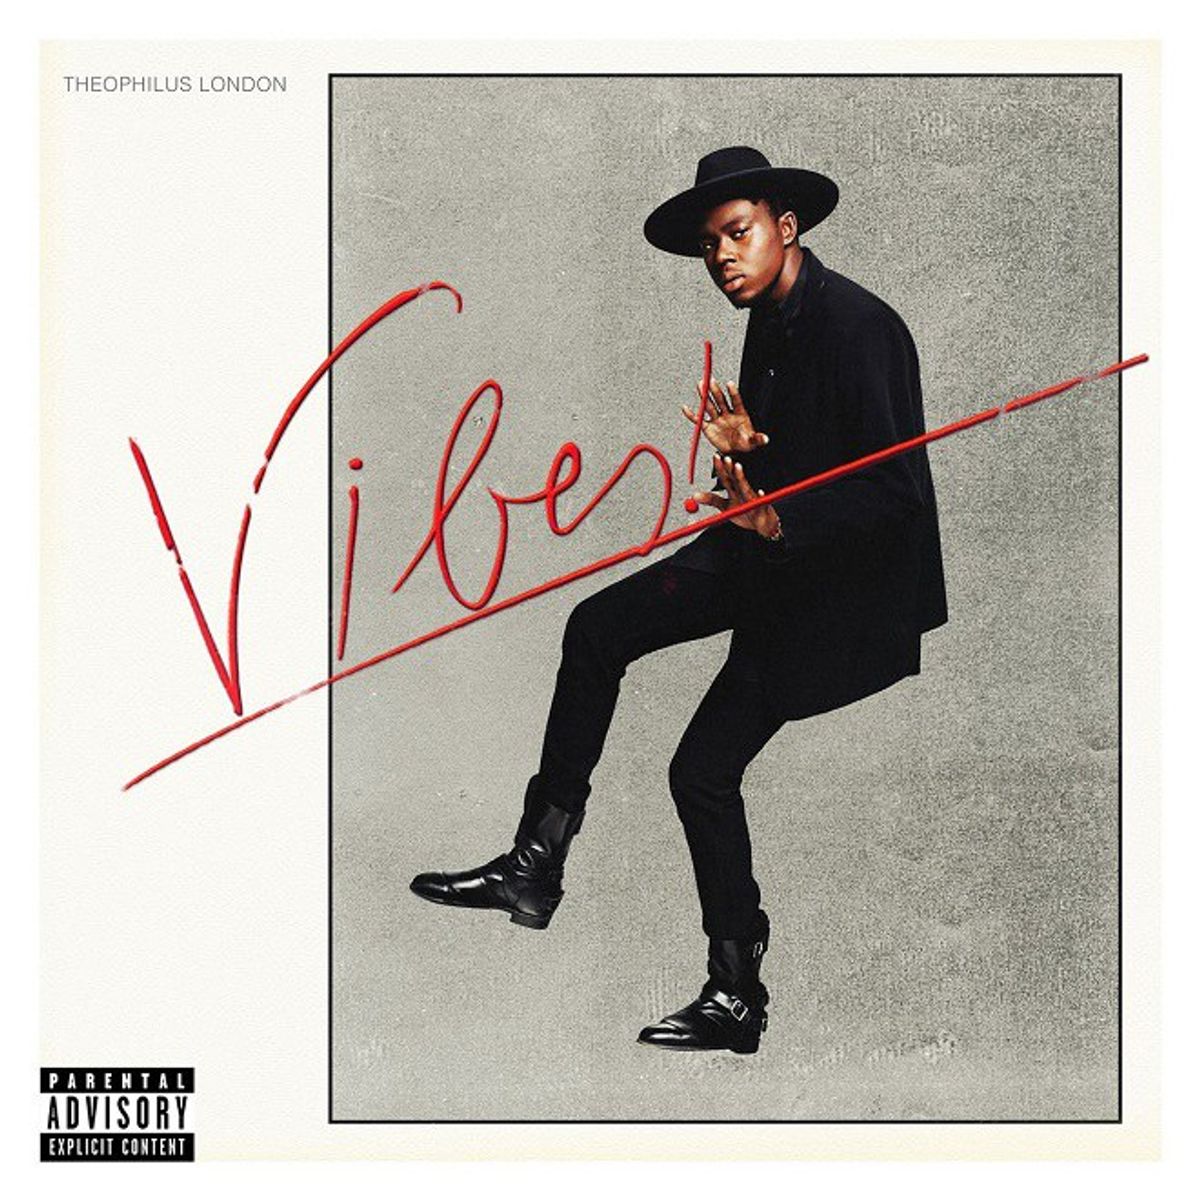 Theophilus London:  An Artist  Like No Other